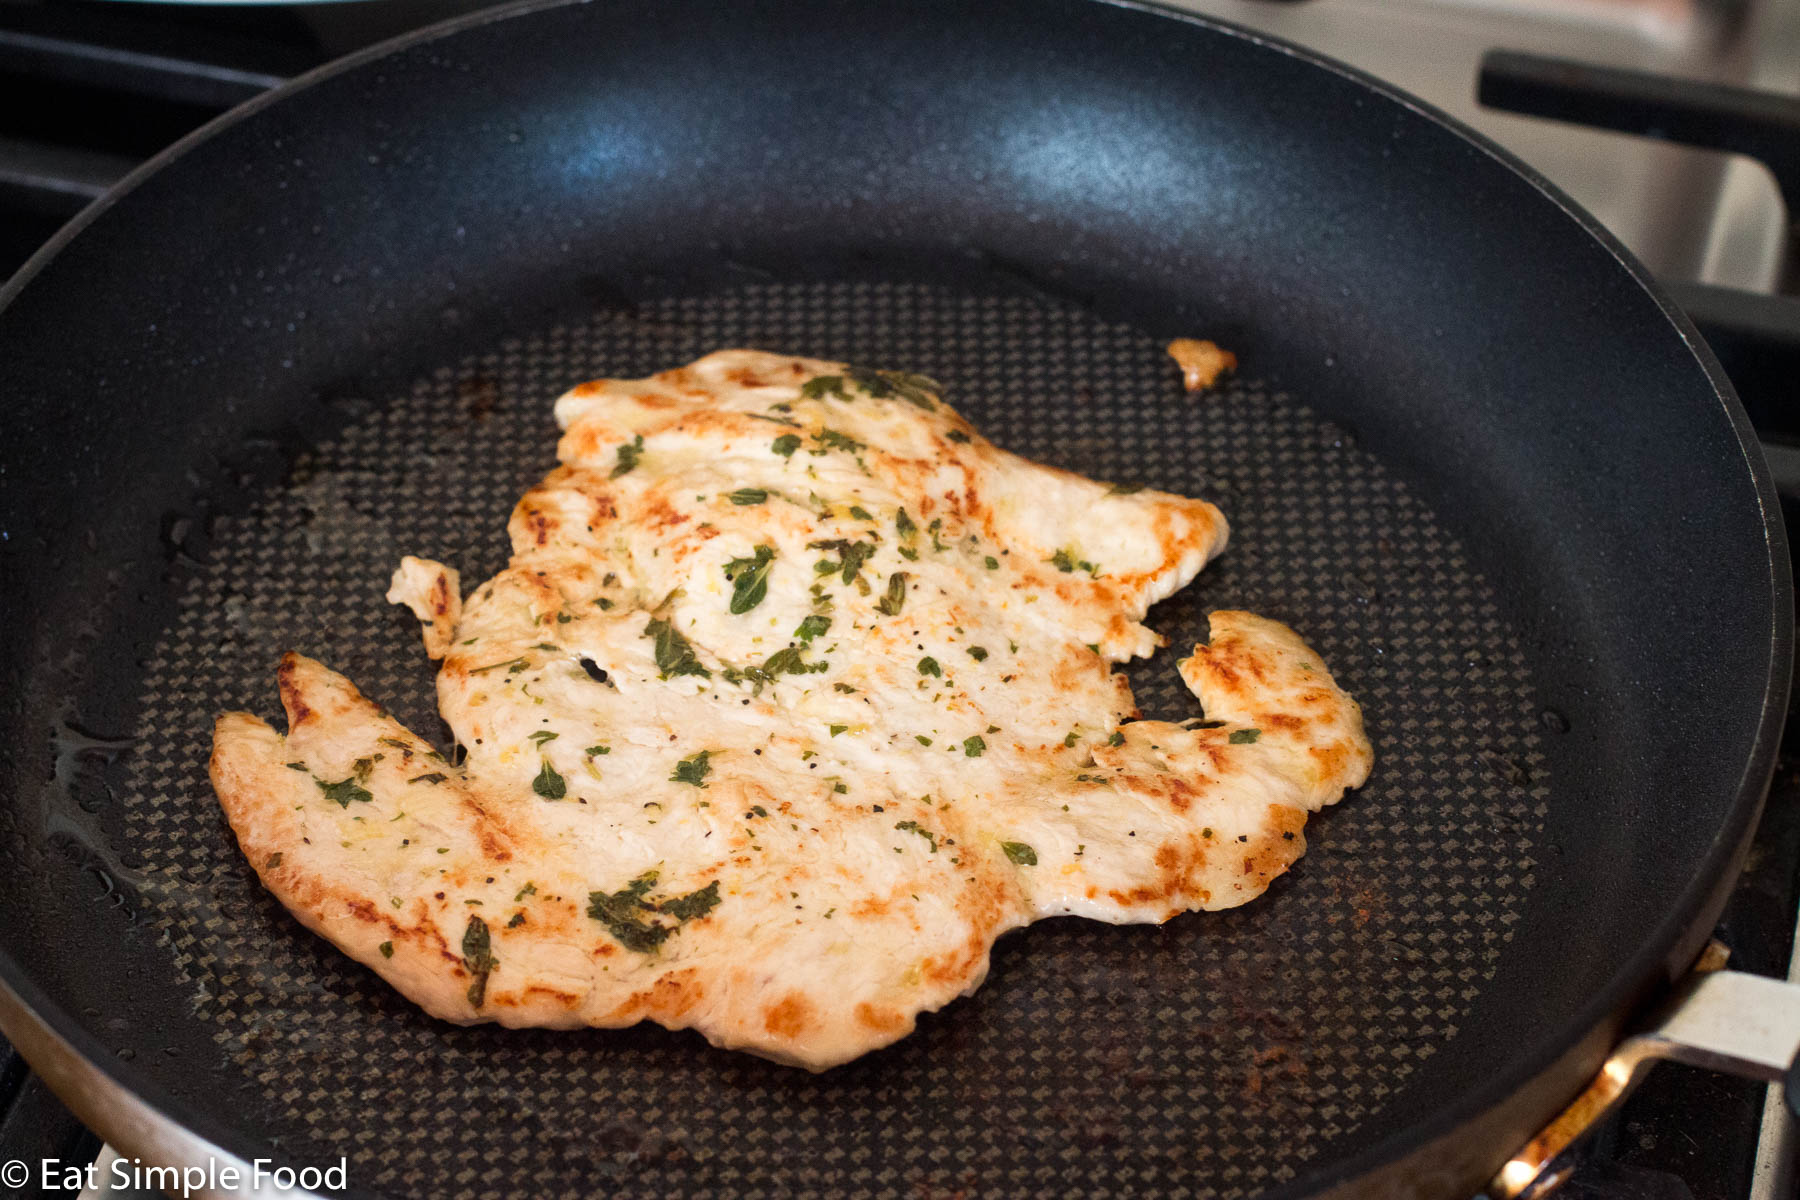 Flattened piece of chicken breast seared in a black skillet. Side view.